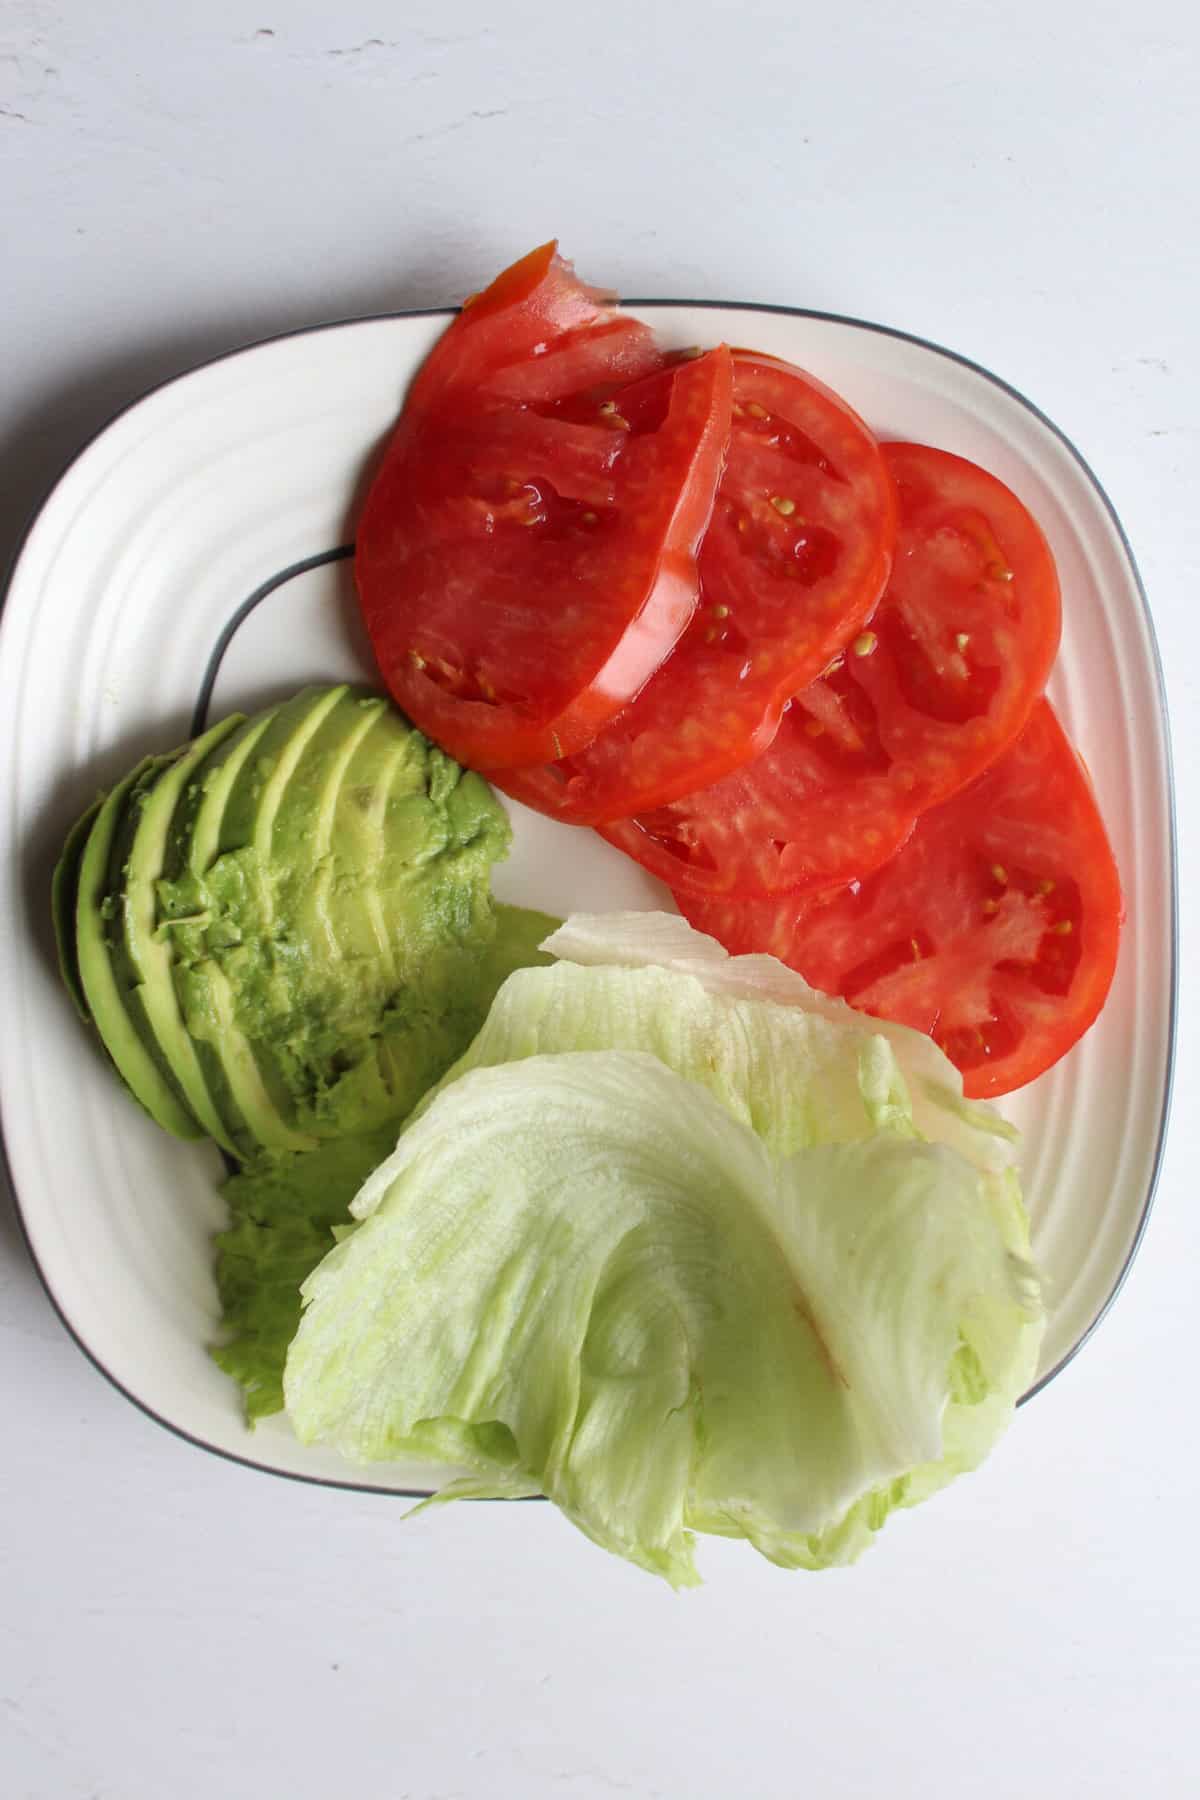 lettuce, avocado, and tomato on a plate